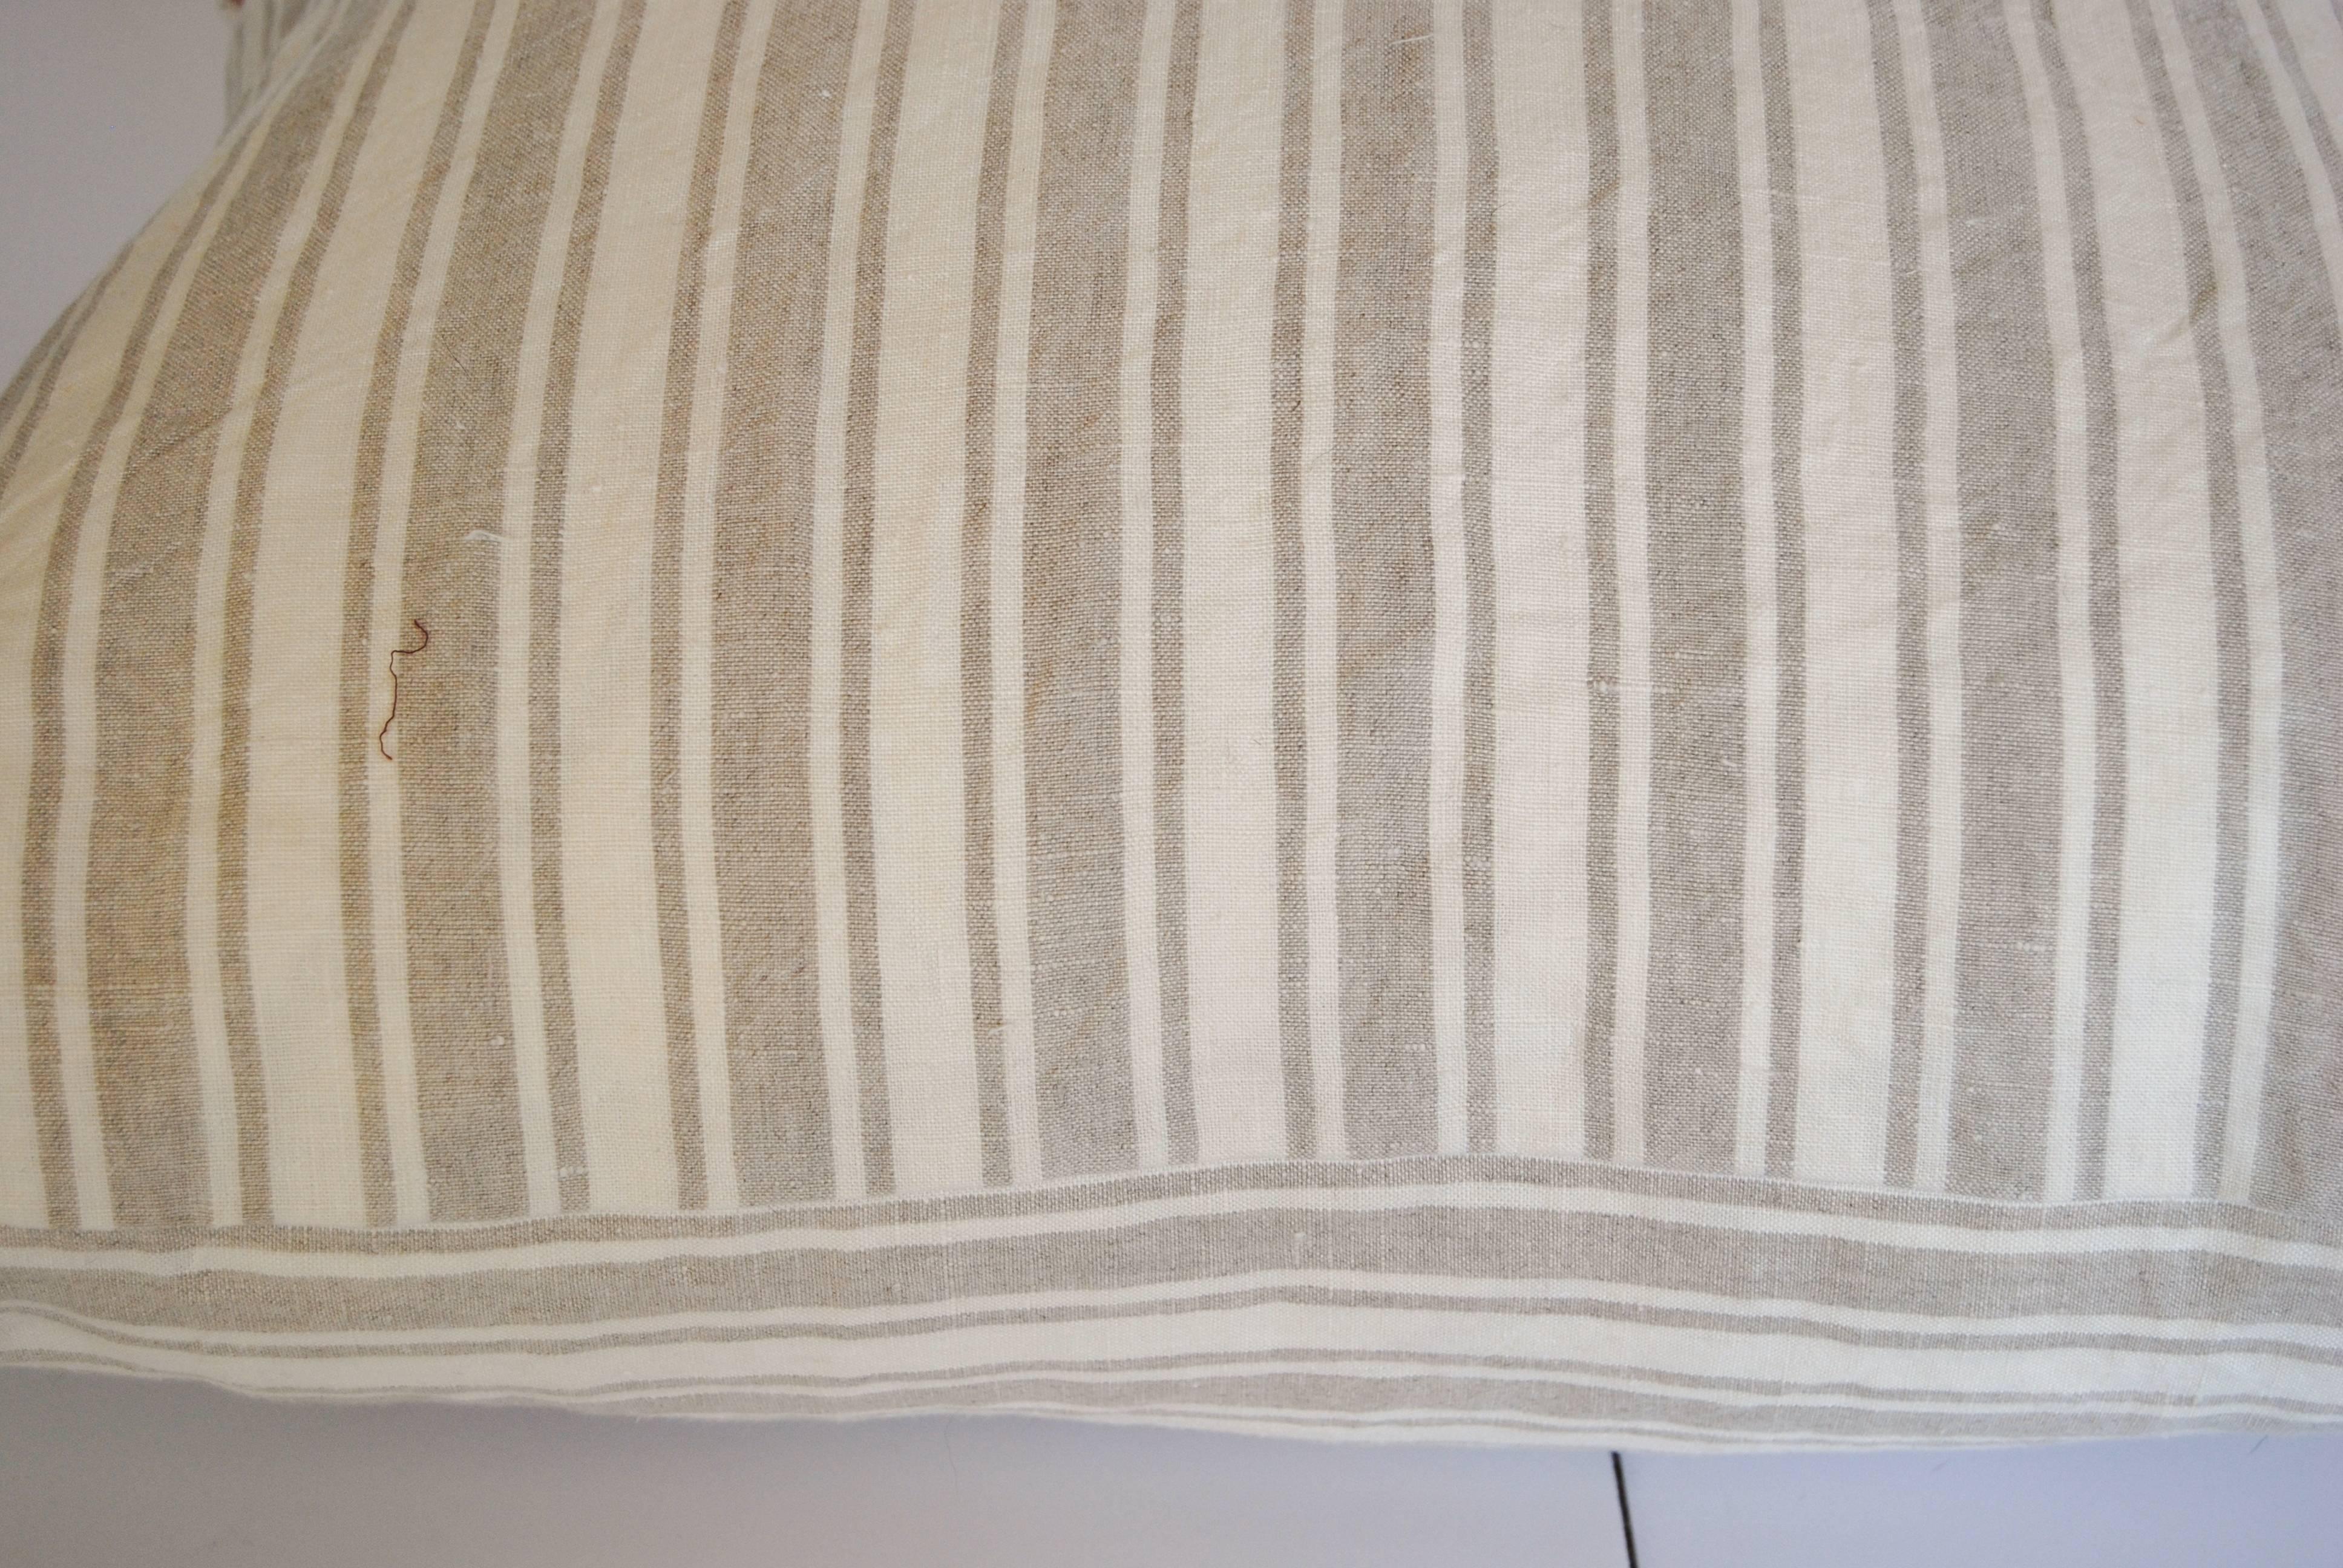 20th Century Custom Pillows Cut from a Vintage French Linen Stripe Textile